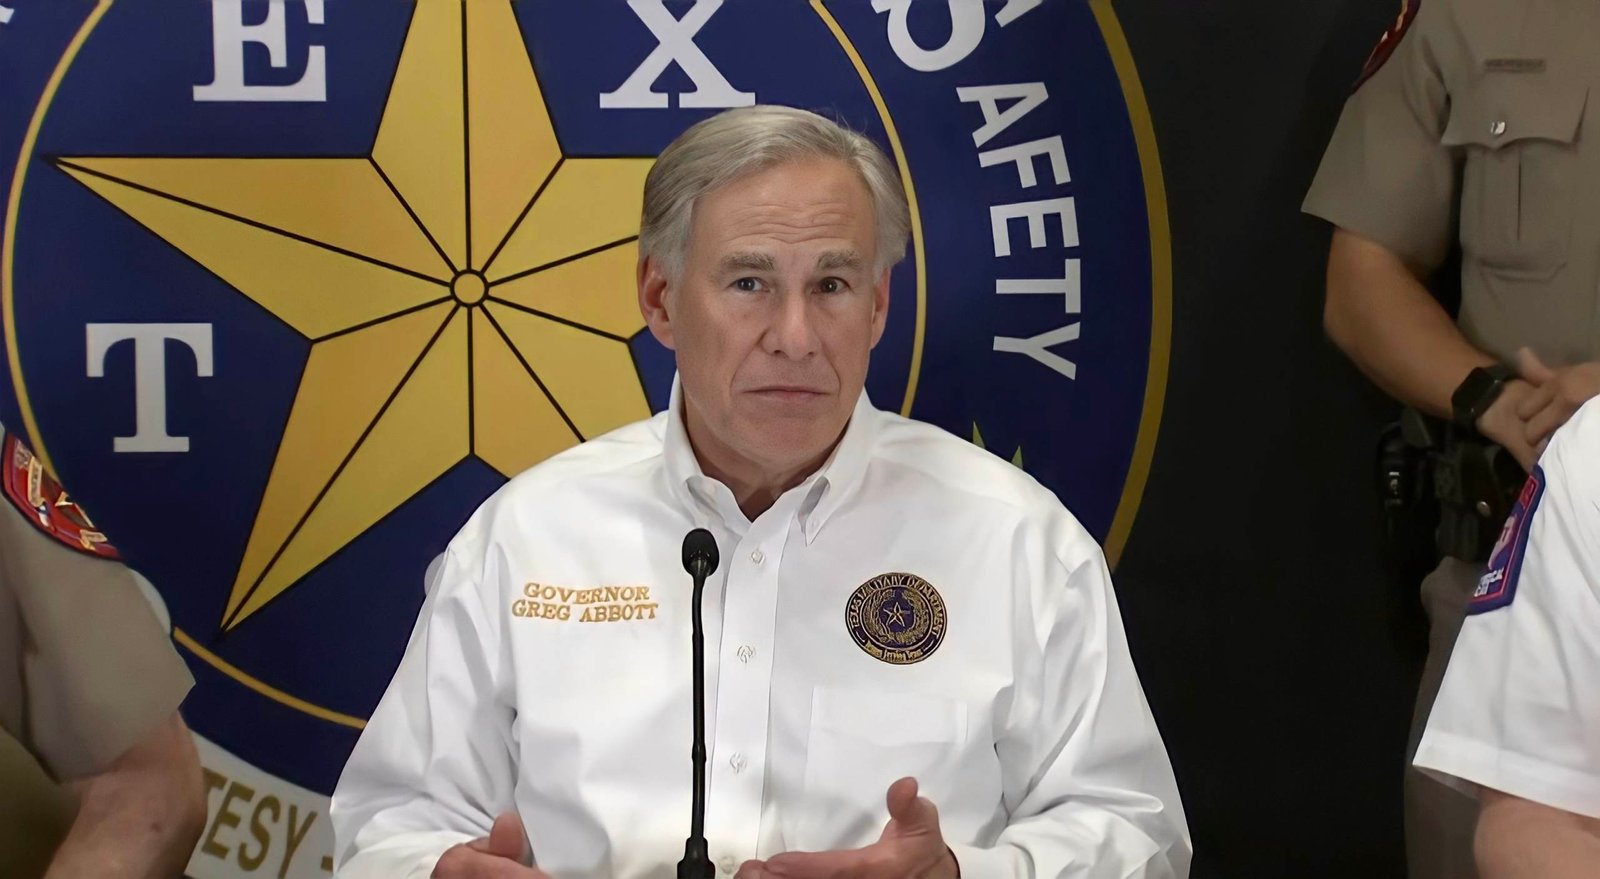 Texas Governor Greg Abbott Announces He Will Use Charter Buses to Send Illegal Immigrants to Washington D.C (VIDEO)